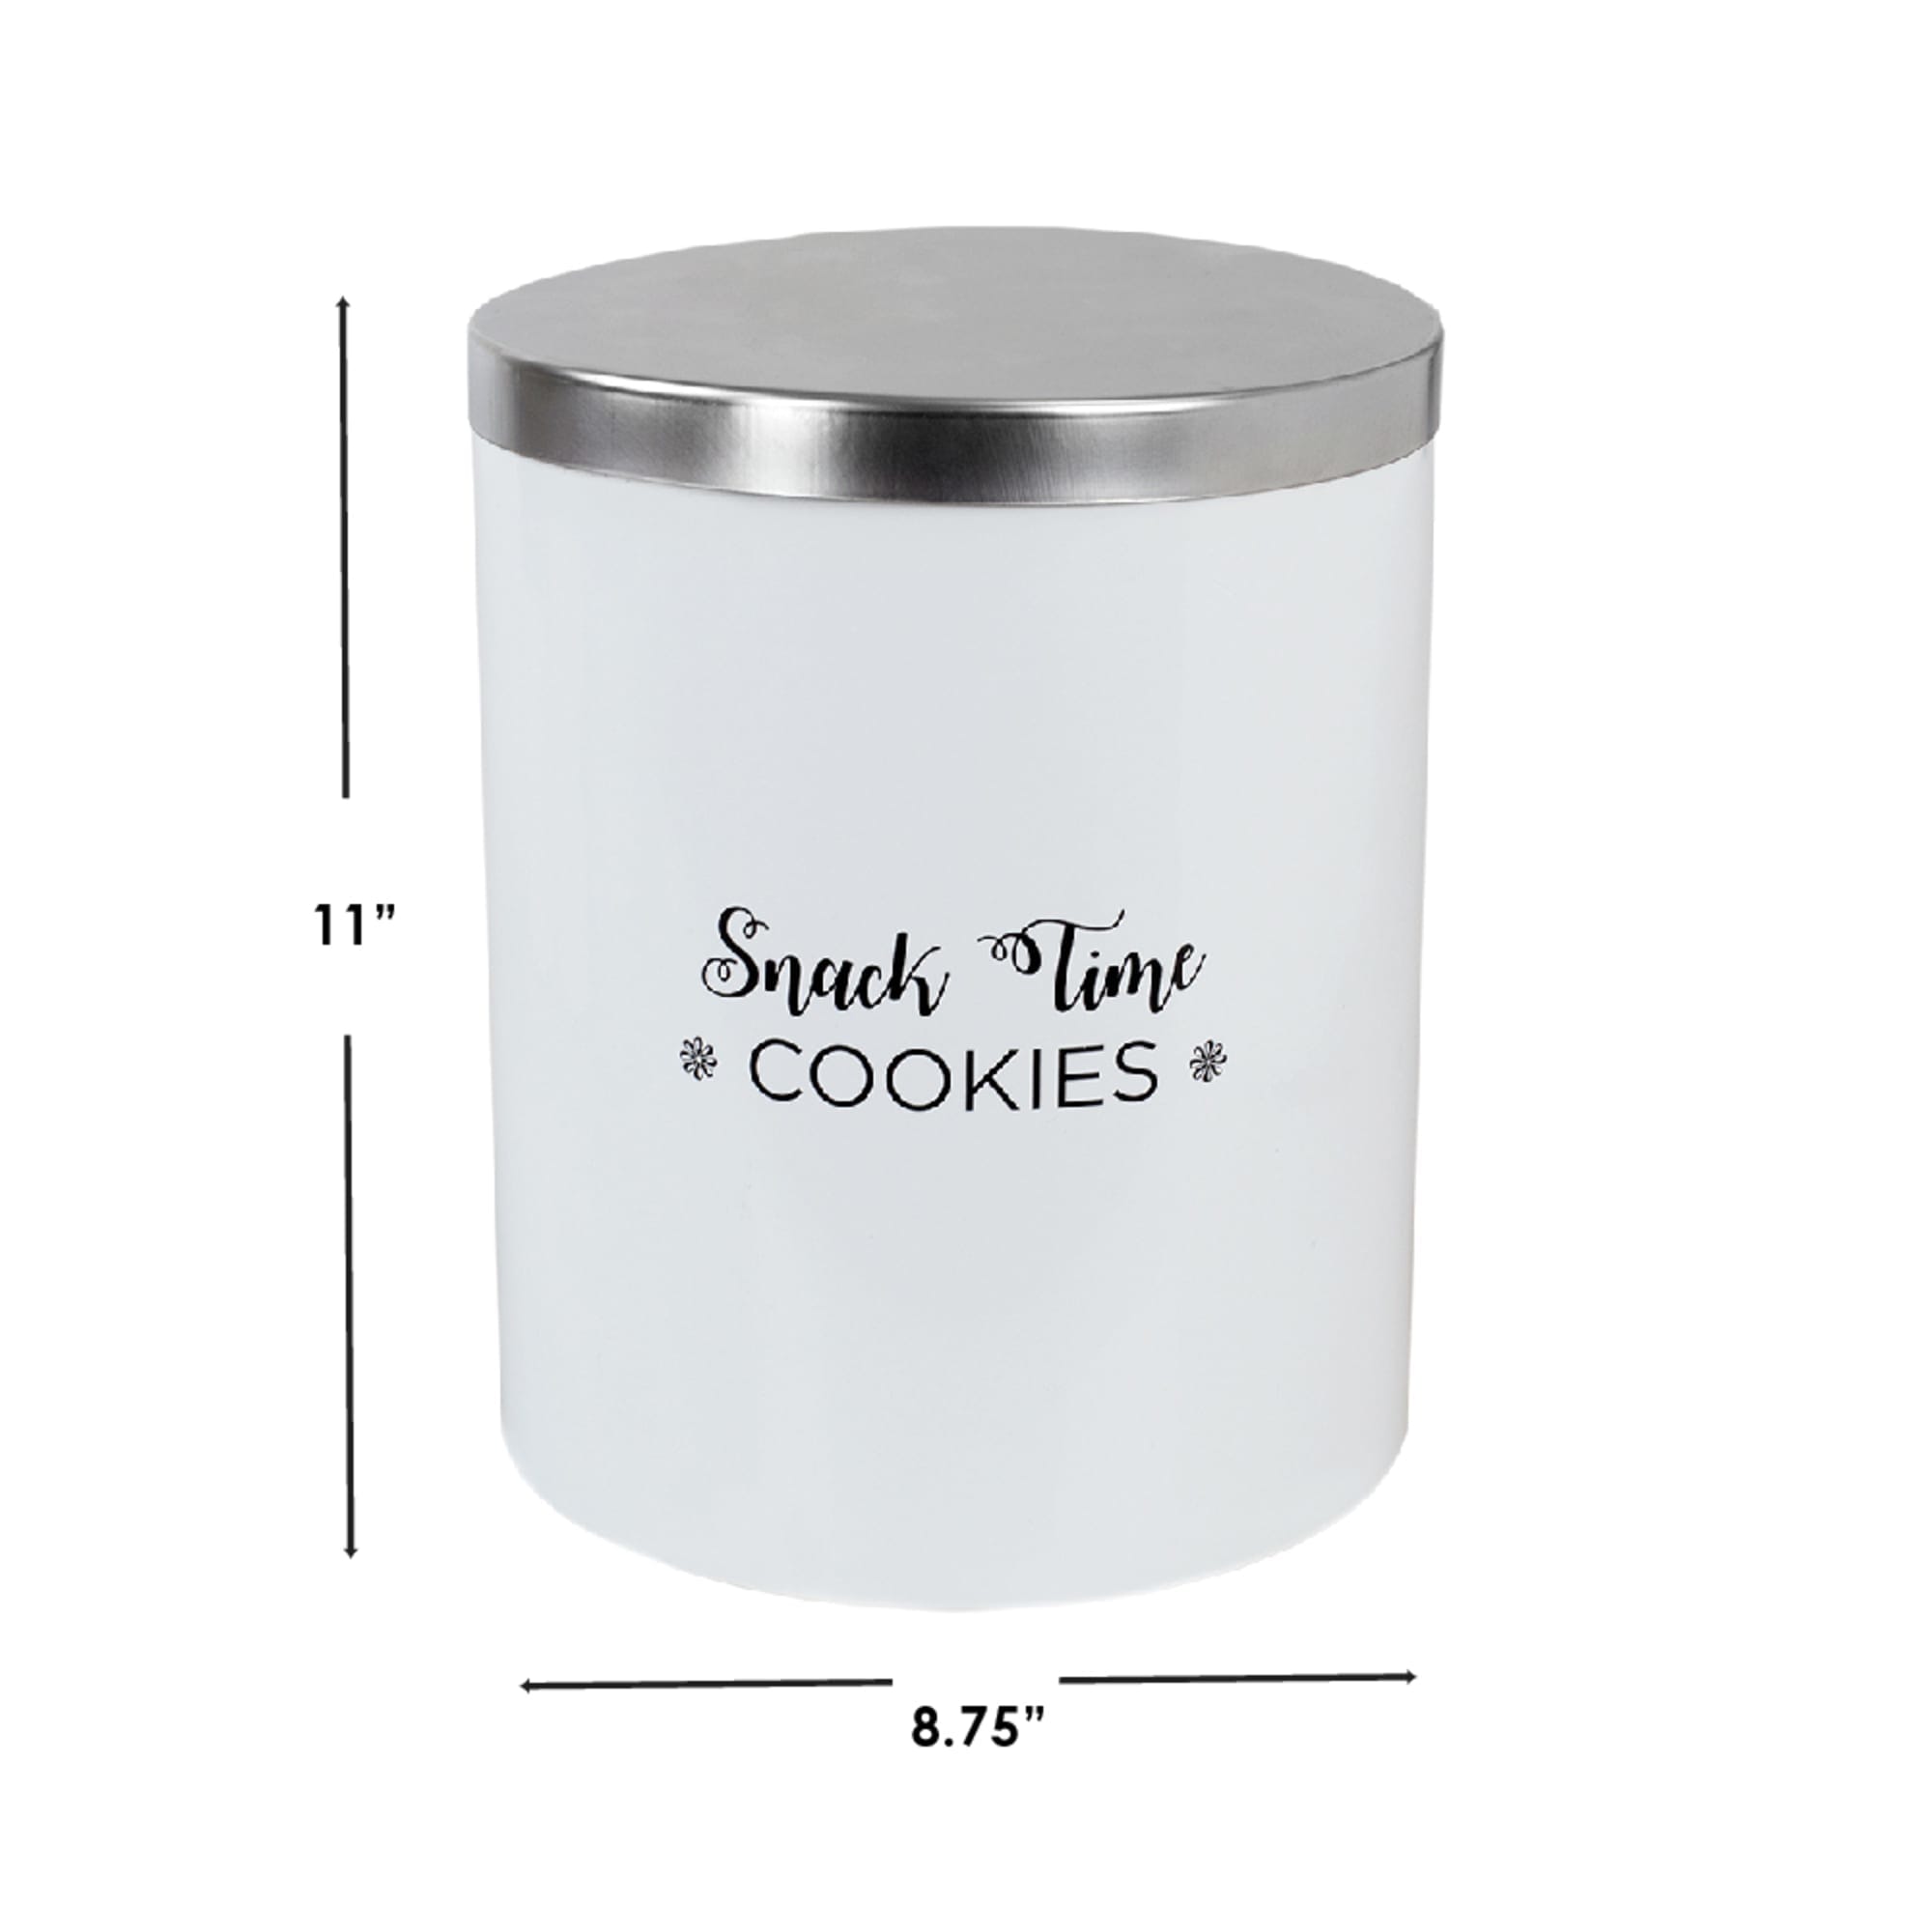 Home Basics Cuisine Collection Large  Canister with Brushed Stainless Steel Top $10.00 EACH, CASE PACK OF 6